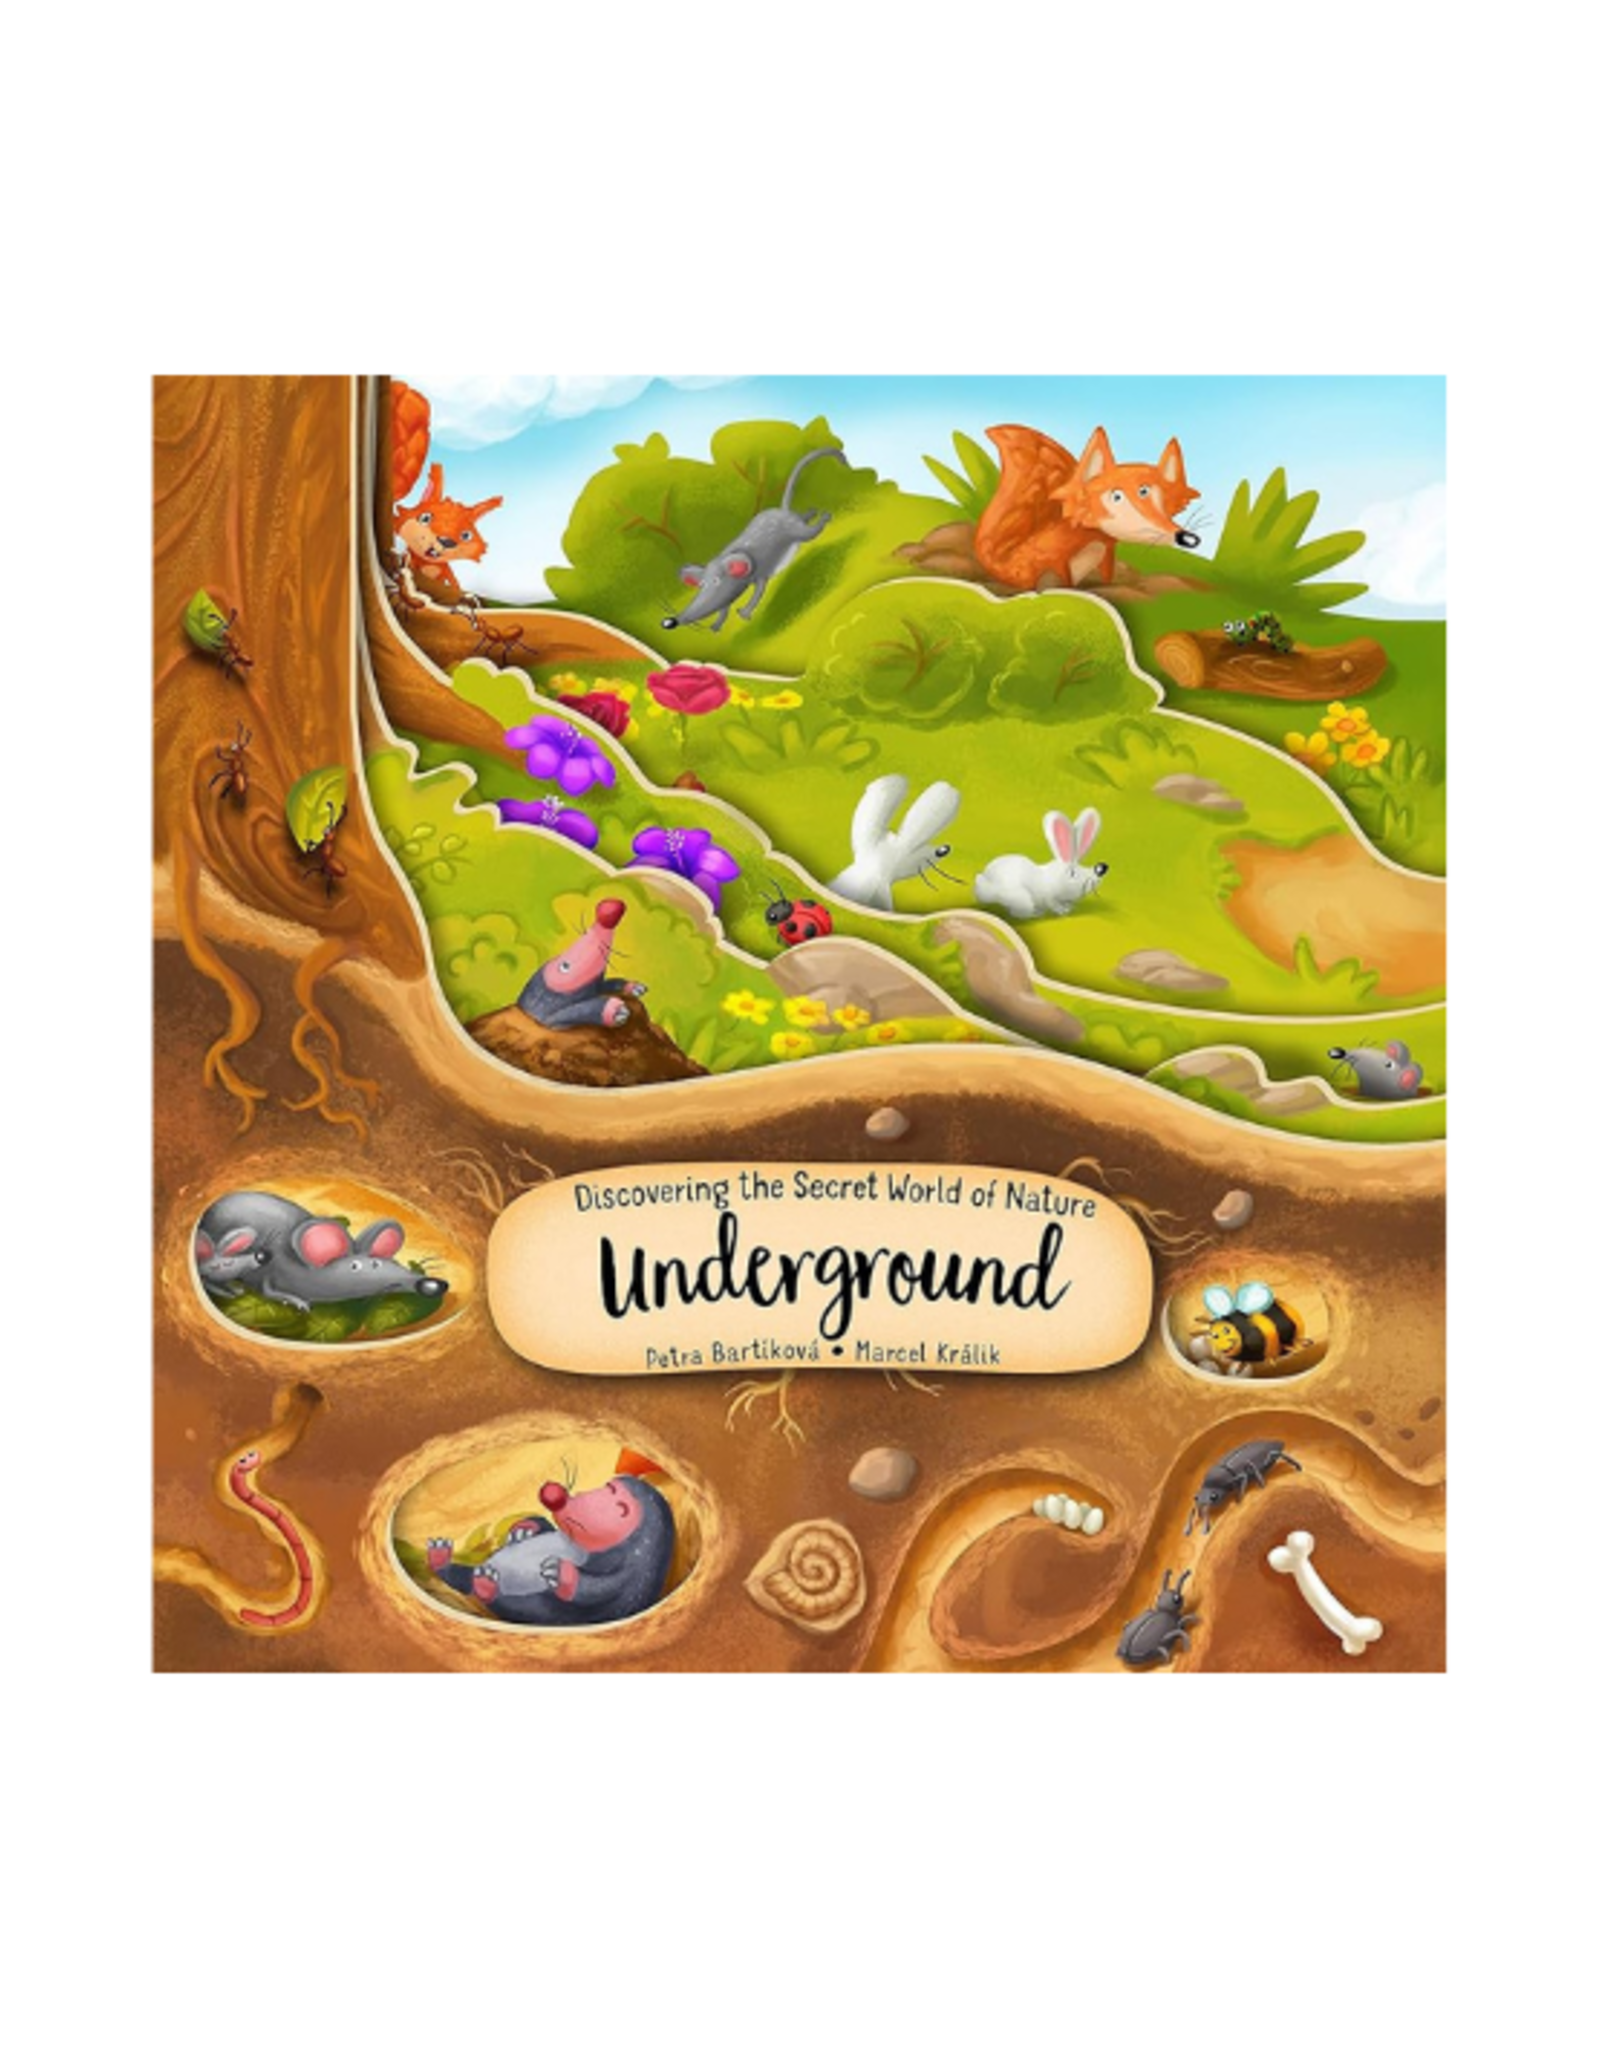 Happy Fox Books Book - Discovering the Secret World of Nature Underground